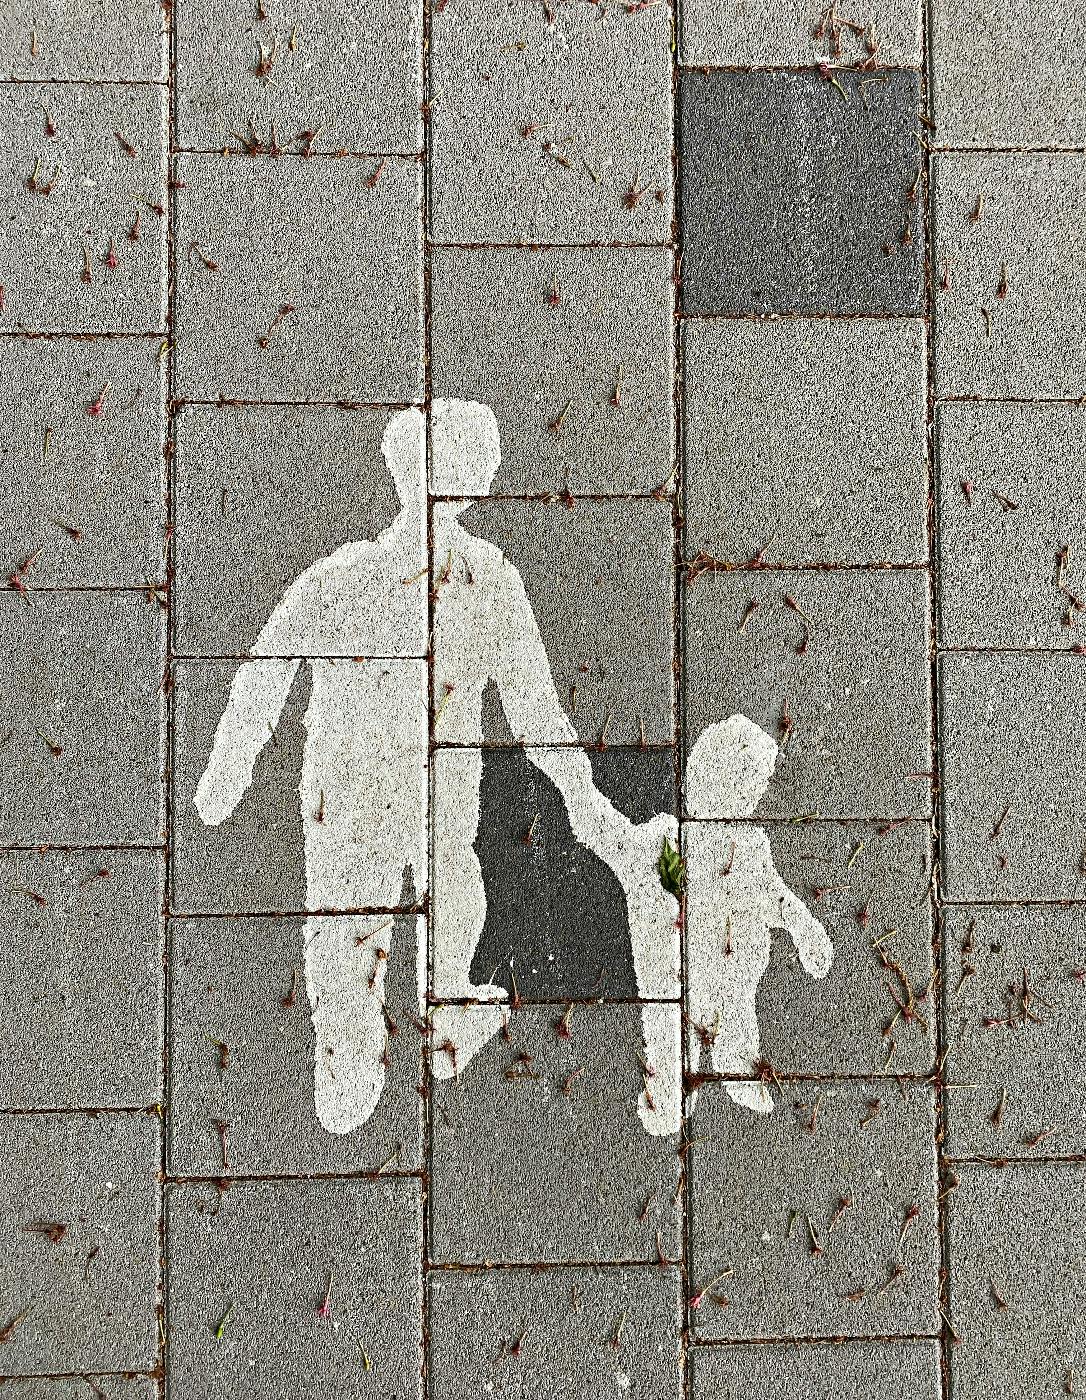 A painting in the sidewalk, outline of an adult holding  a child's hand